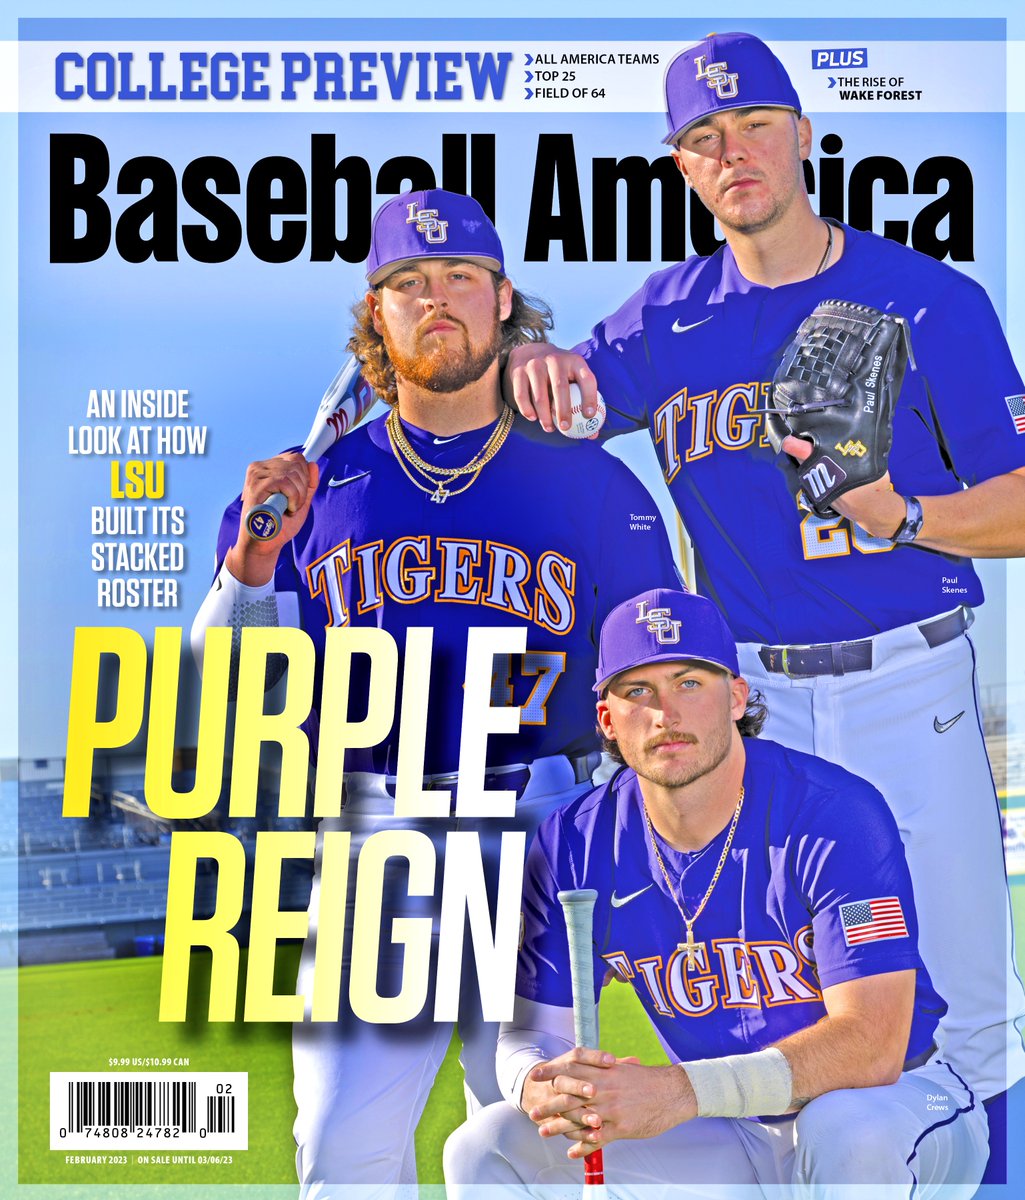 As first seen on @LSUbaseball's social media ... 🚨OUR COLLEGE PREVIEW COVER IS HERE 🚨 The stacked lineup of Tommy White, Paul Skenes and Dylan Crews headlines a stacked Tigers team. Make sure you pre-order your issue NOW! baseballamerica.myshopify.com/products/20230…